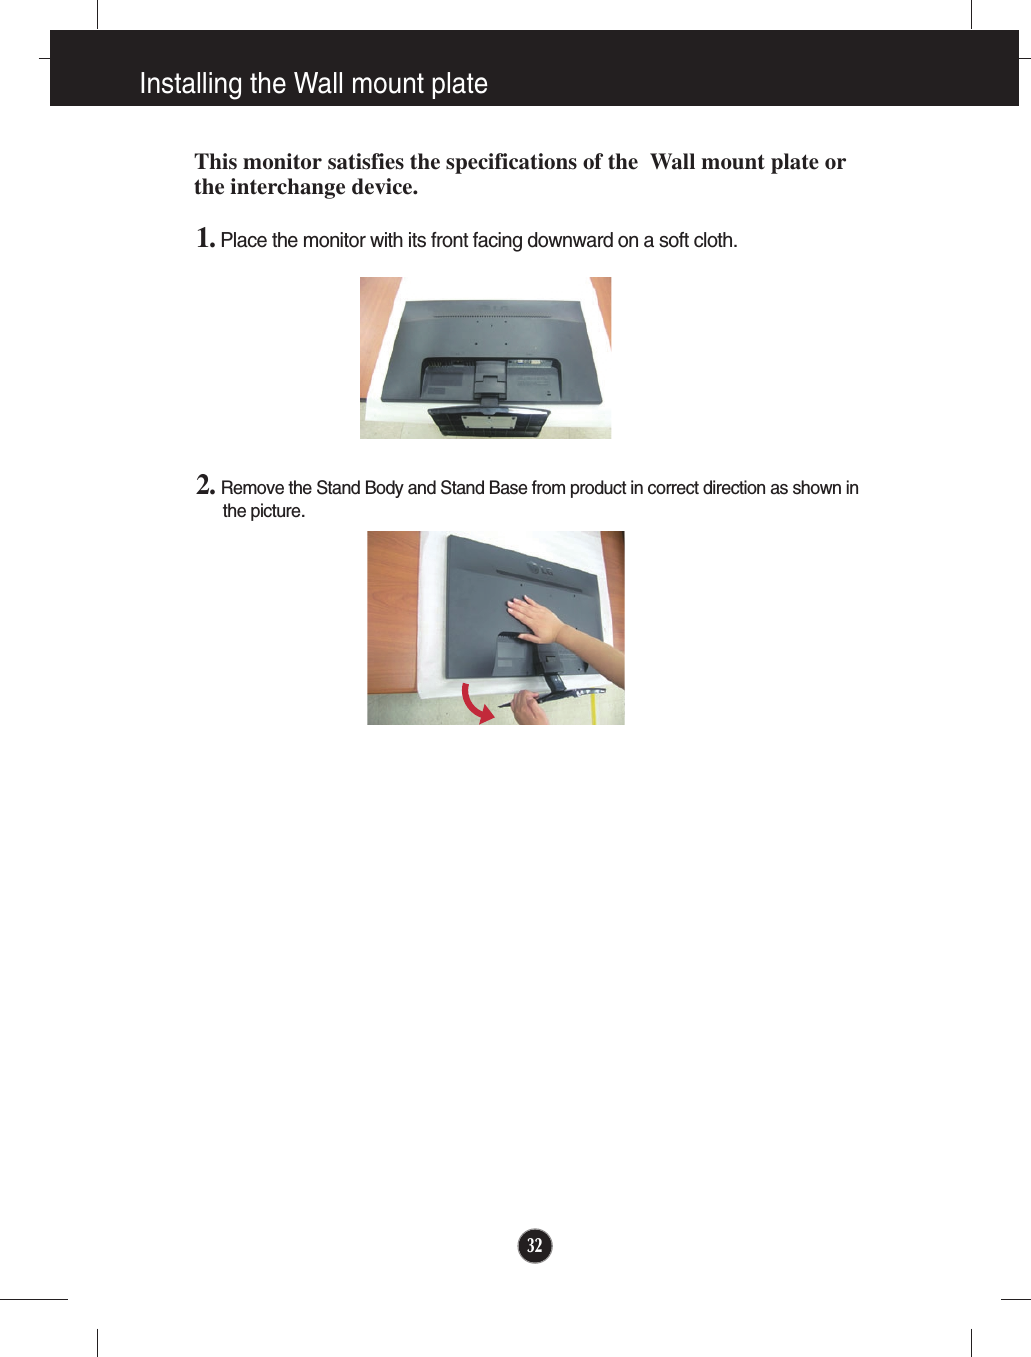 1. Place the monitor with its front facing downward on a soft cloth.2. Remove the Stand Body and Stand Base from product in correct direction as shown inthe picture.32Installing the Wall mount plateThis monitor satisfies the specifications of the  Wall mount plate orthe interchange device.